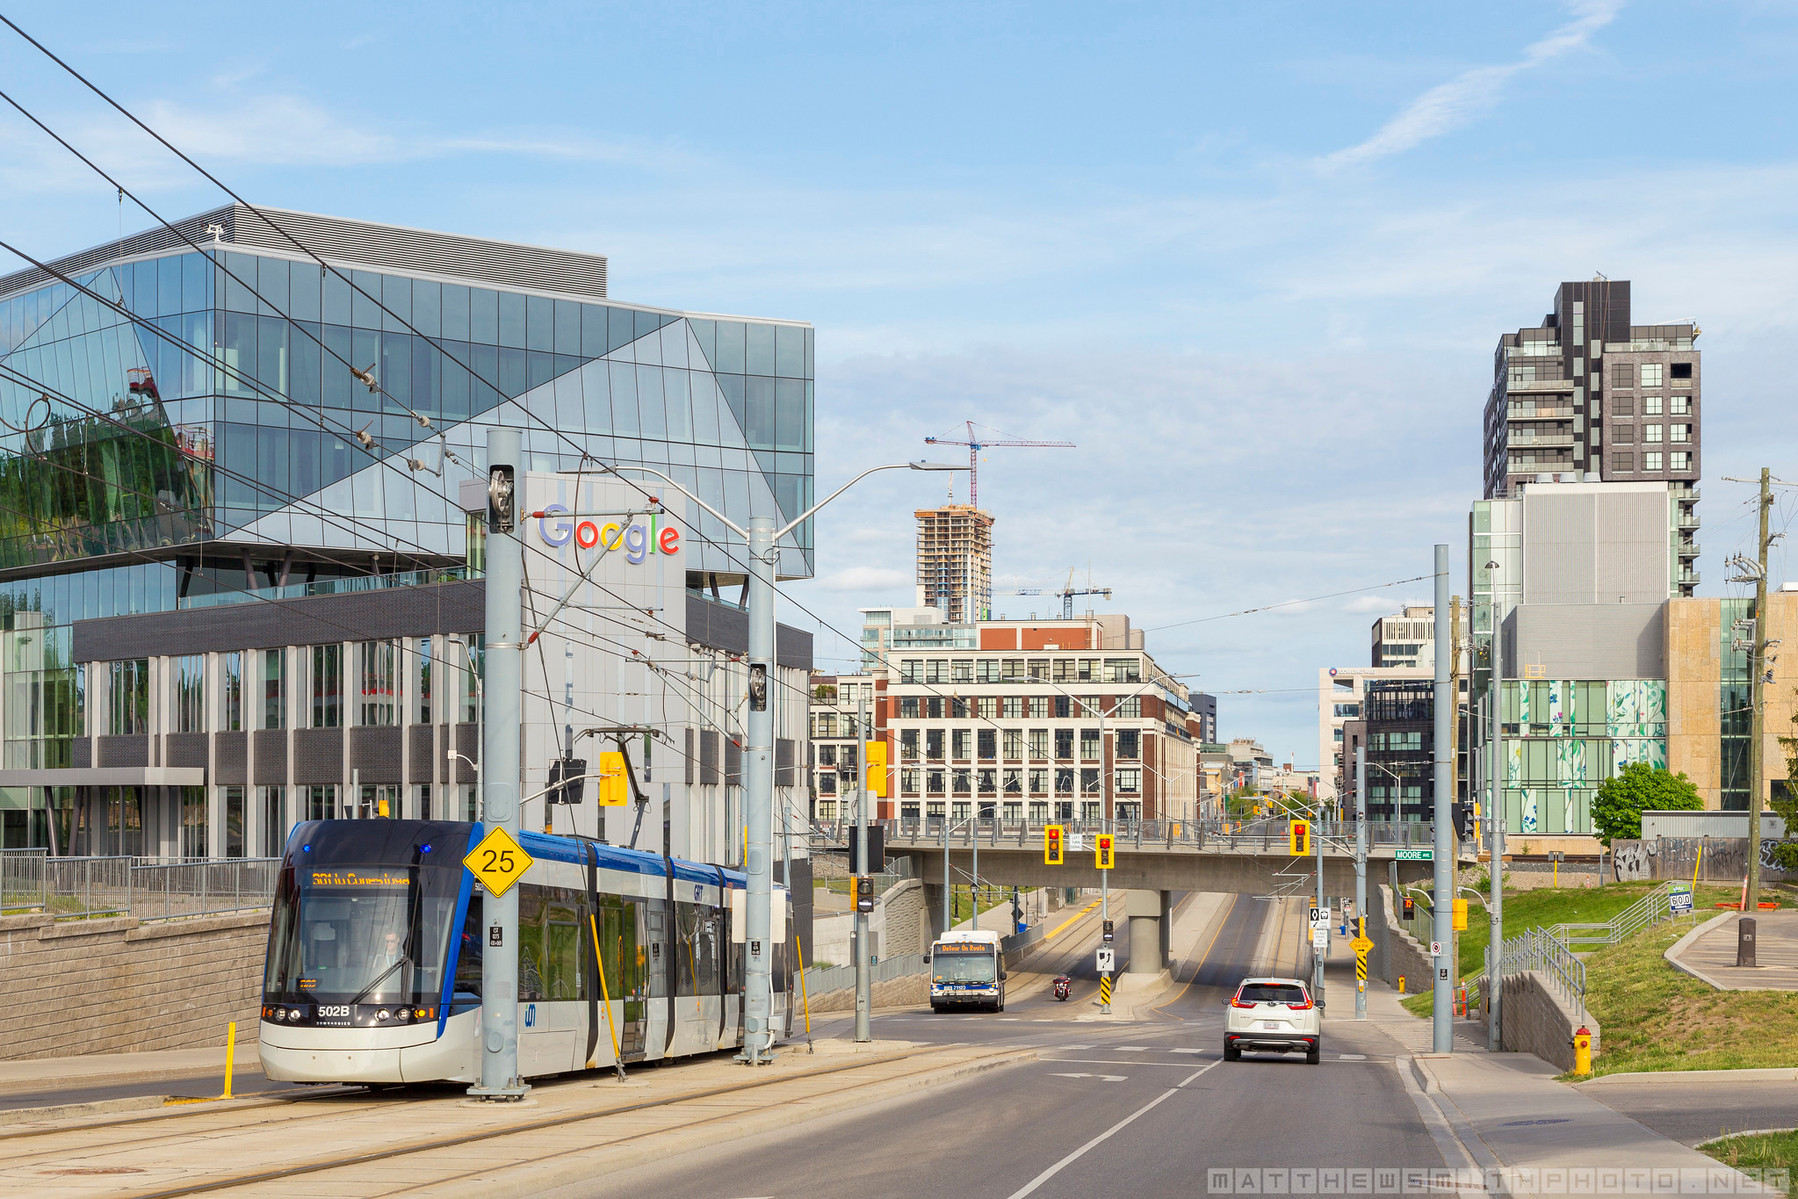 Kitchener's growing skyline featuring Google office and ION LRT. 